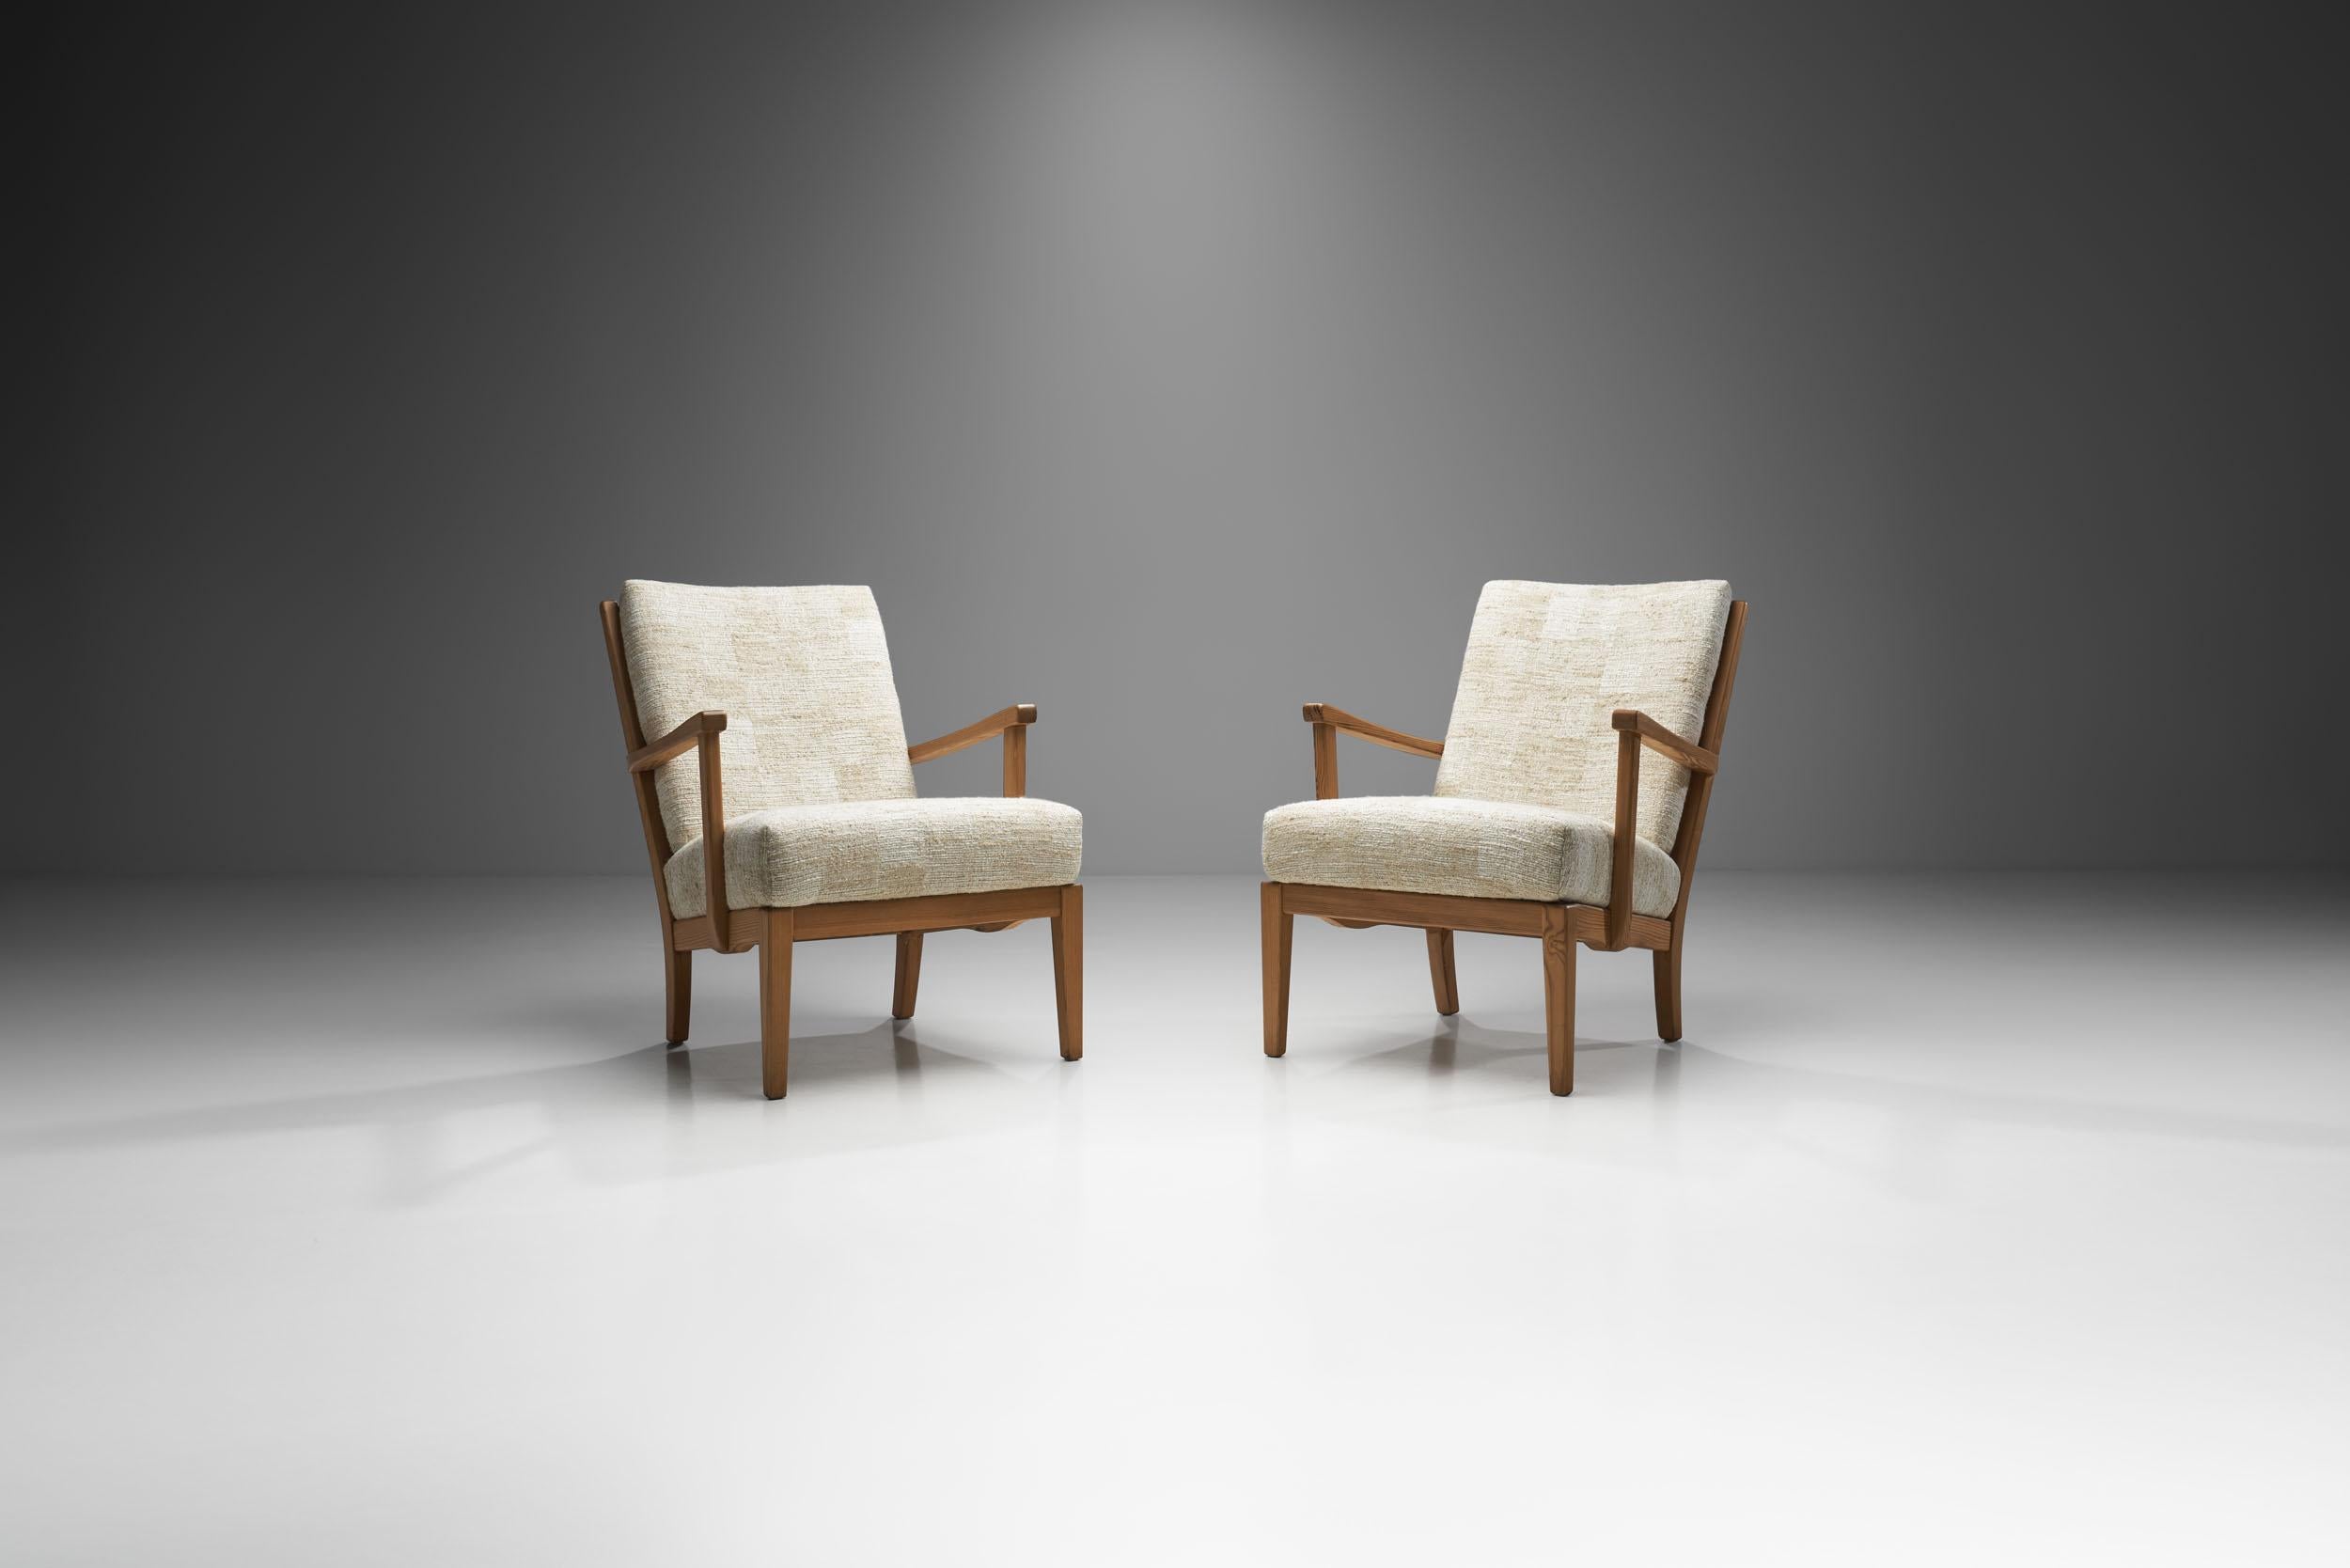 The famous “Visingsö” series demonstrates Carl Malmsten’s fine sense of proportion, line tension and balance between the surfaces, and how skilfully he carried in the heritage of traditional allmoge (folk art) design.

This pair of Visingsö chairs